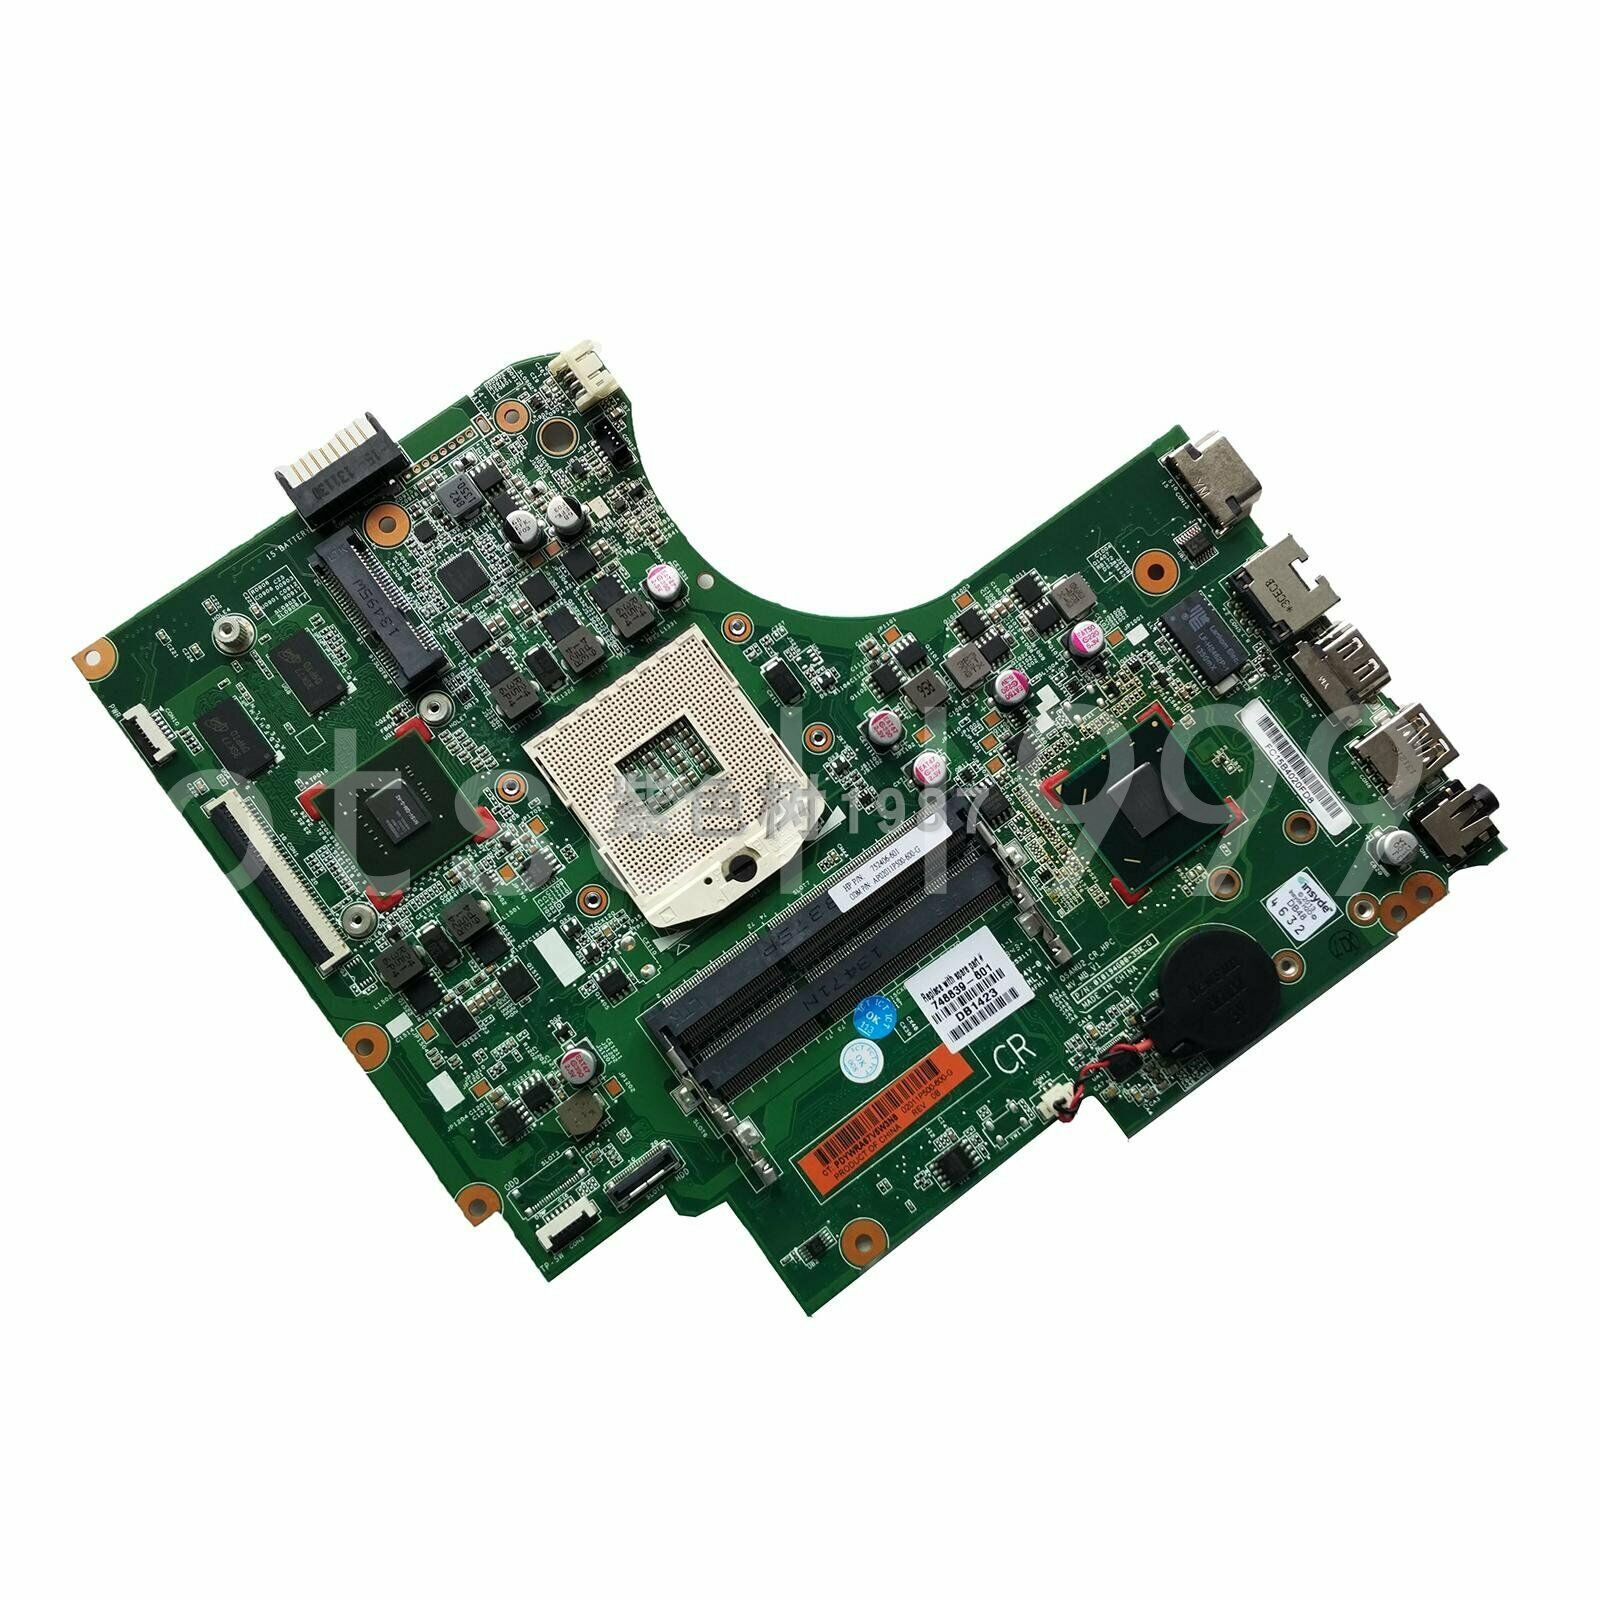 FOR HP 15-D TPN-F112T F113 F114 laptop motherboard 748839-501 tested ok Brand: HP Number of Memory Slots: